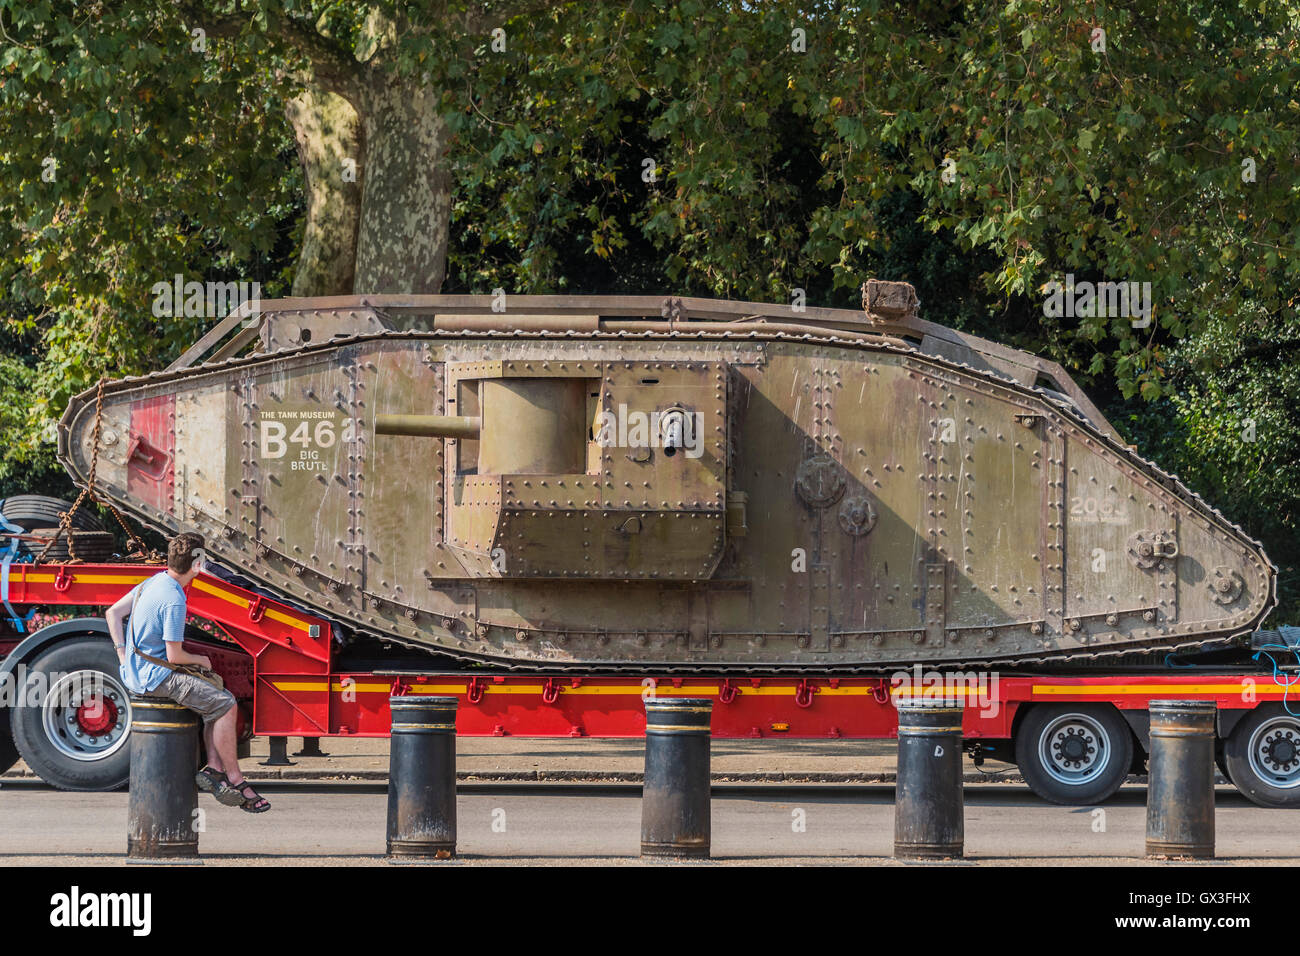 London, UK. 15th September, 2016. The tank is brought to Horse Guards Parade on a transporter on the short ride from Admiralty Arch to avoid damage to the road, here passing the memorial to the members of the Household Division - A replica of a World War One tank brought to London to mark the 100th anniversary its first use in action in the Battle of the Somme on 15 September 1916. Dorset's Tank Museum, provided the machine which was designed to travel at walking pace (3mph) to support the infantry. Credit:  Guy Bell/Alamy Live News Stock Photo